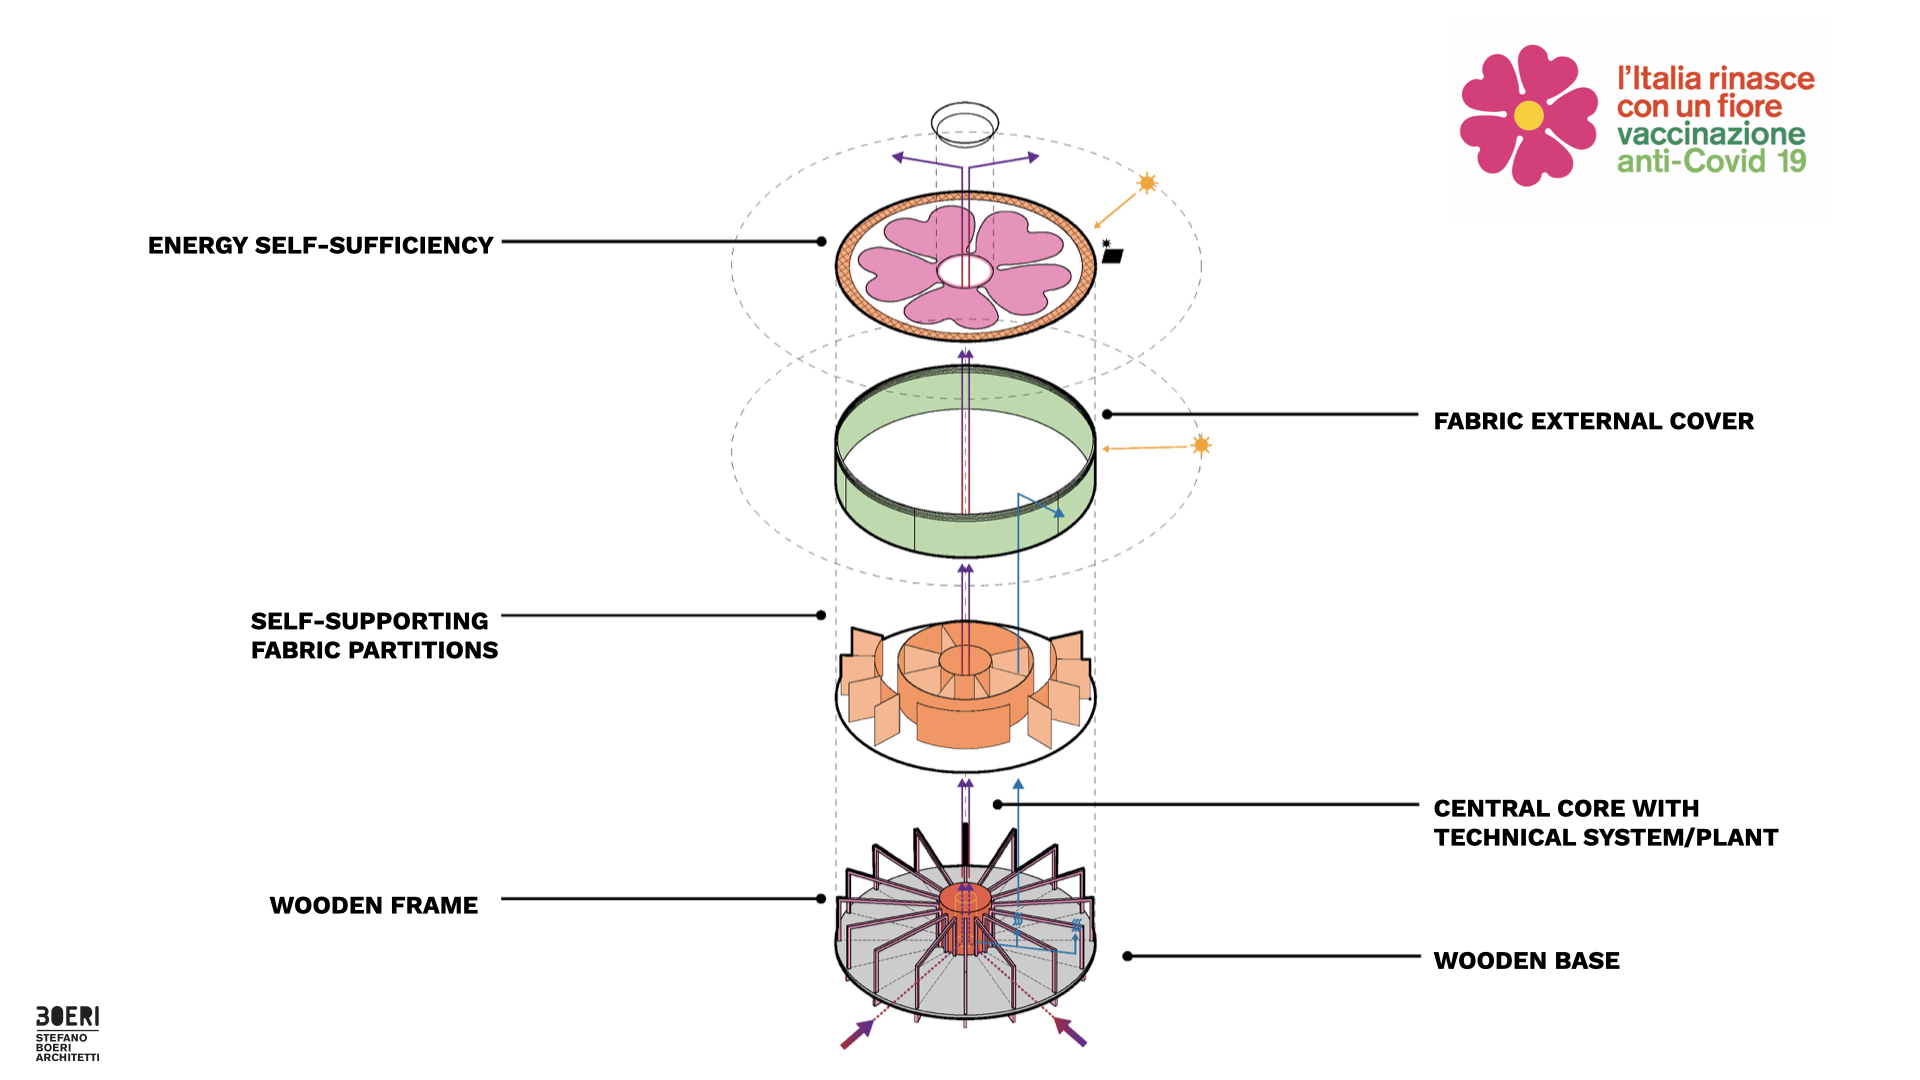 illustration depicting the structural layout of vaccination pavilion 